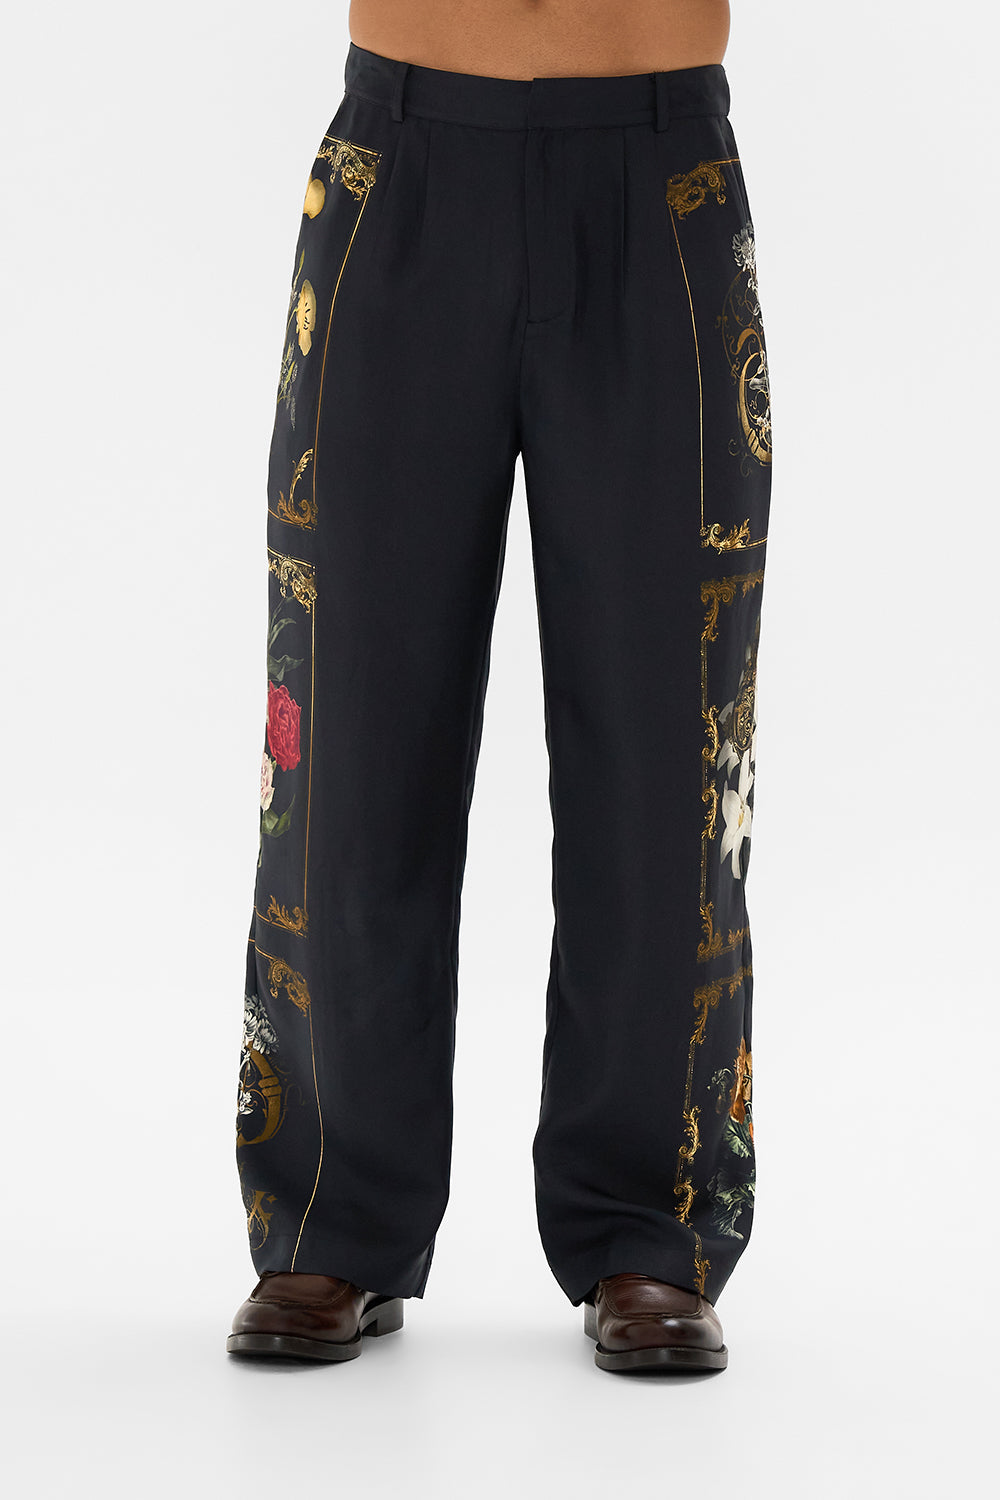 CAMILLA floral tailored lounge pant in Magic in the Manuscripts